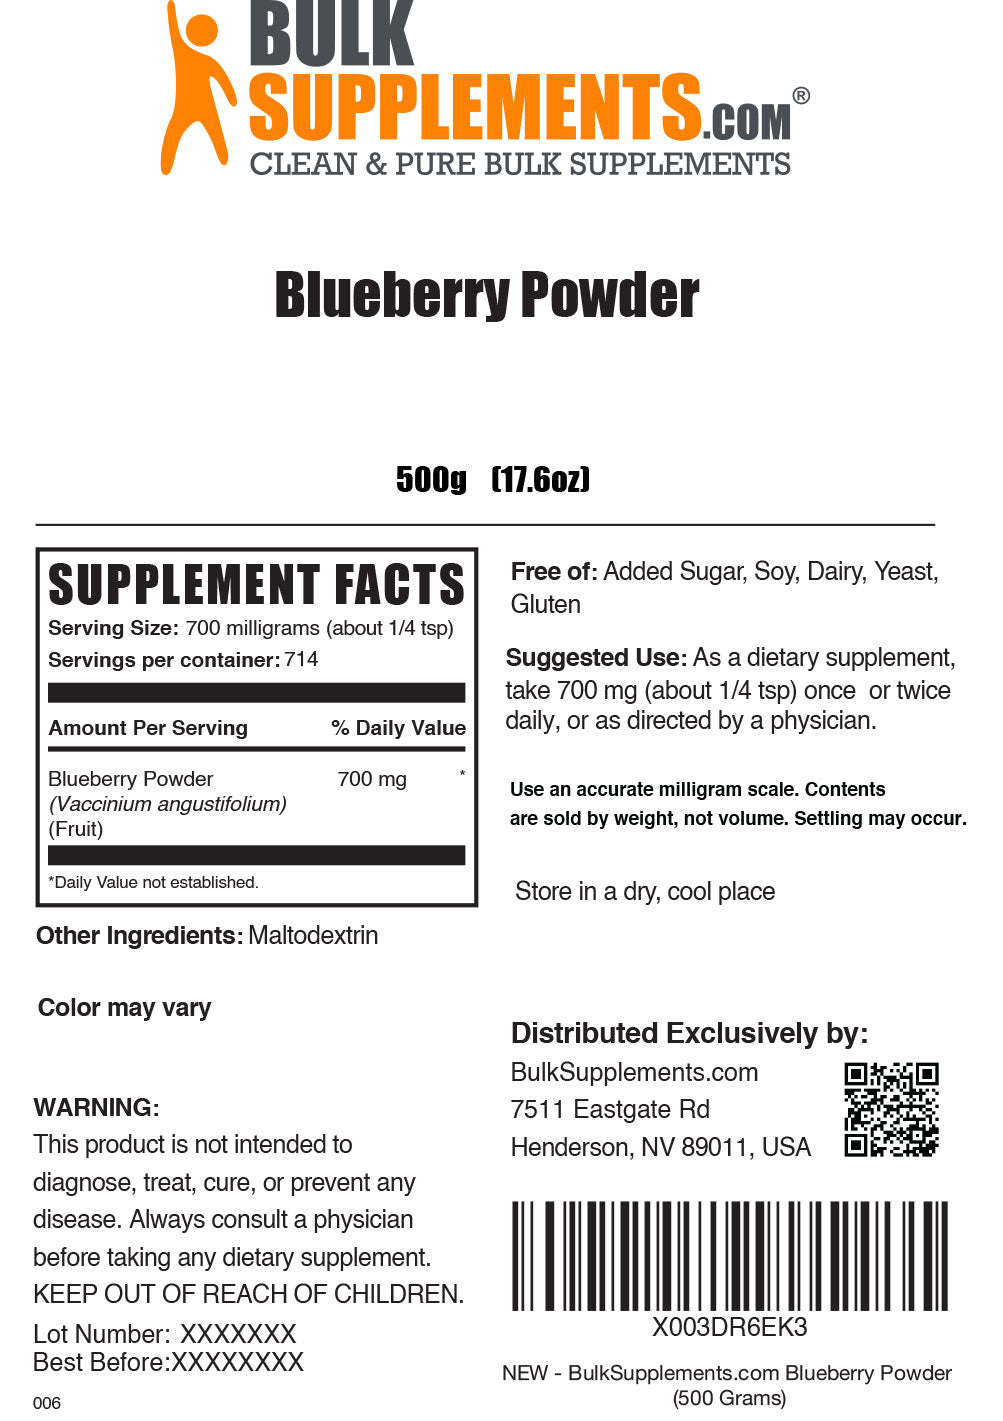 500g of Blueberry Powder Supplement Facts